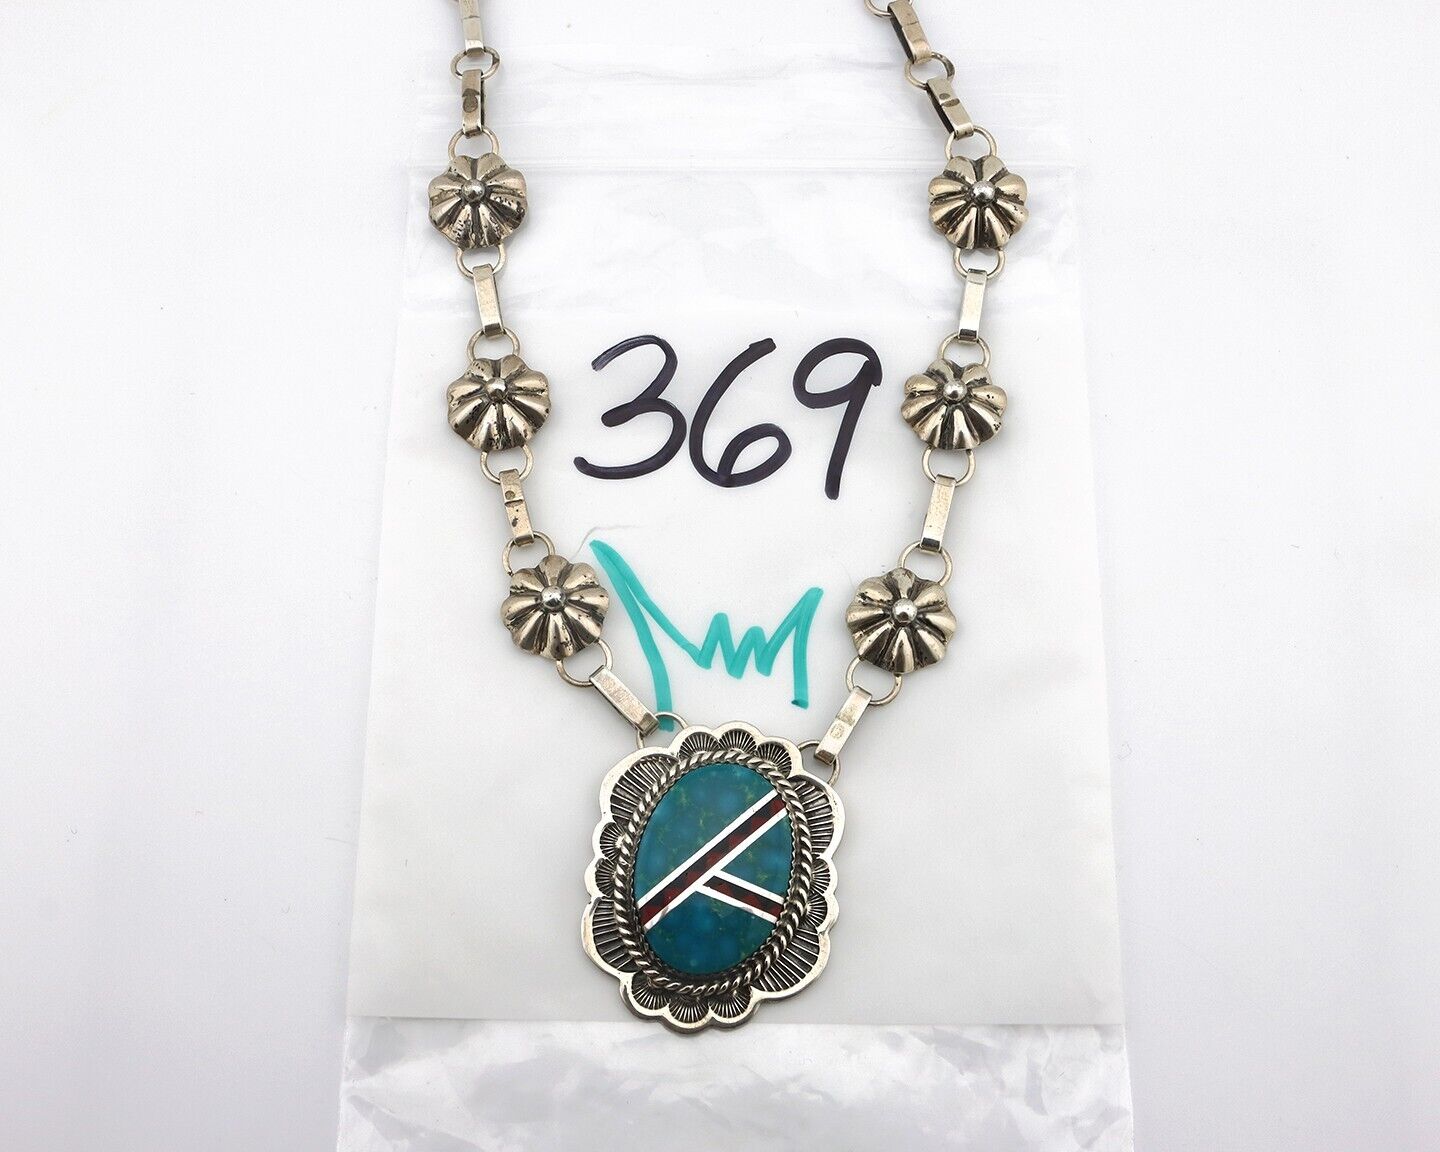 Navajo Necklace 925 Silver Blue Gem Turquoise, Onyx, Coral Signed M Begay C.80's